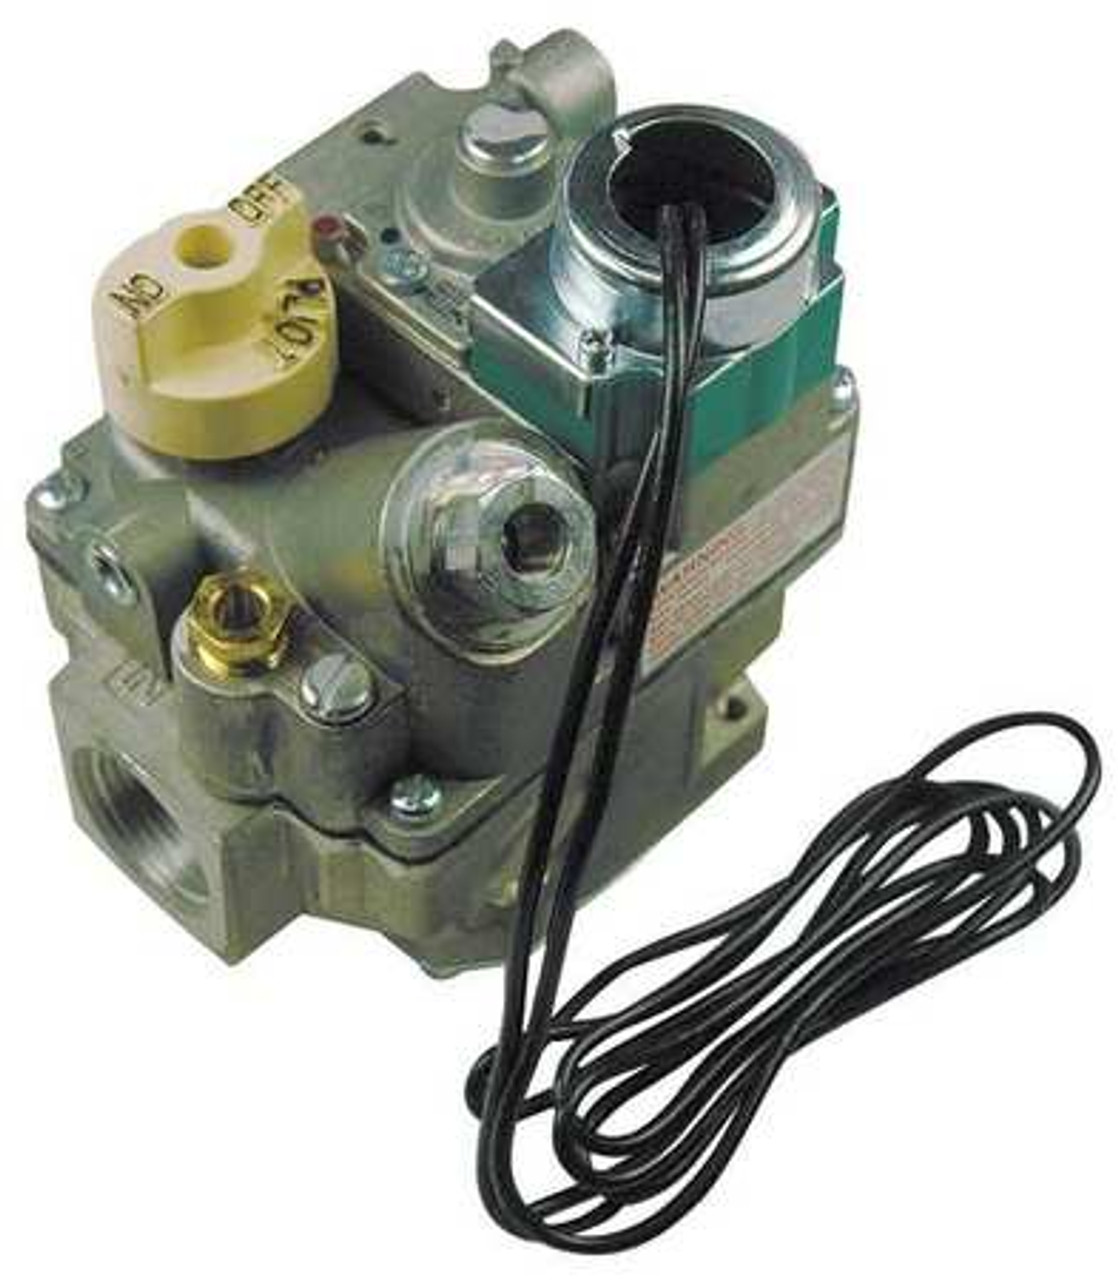 Robertshaw® Combo Gas Safety Solenoid Valve Natural Gas - 120 V